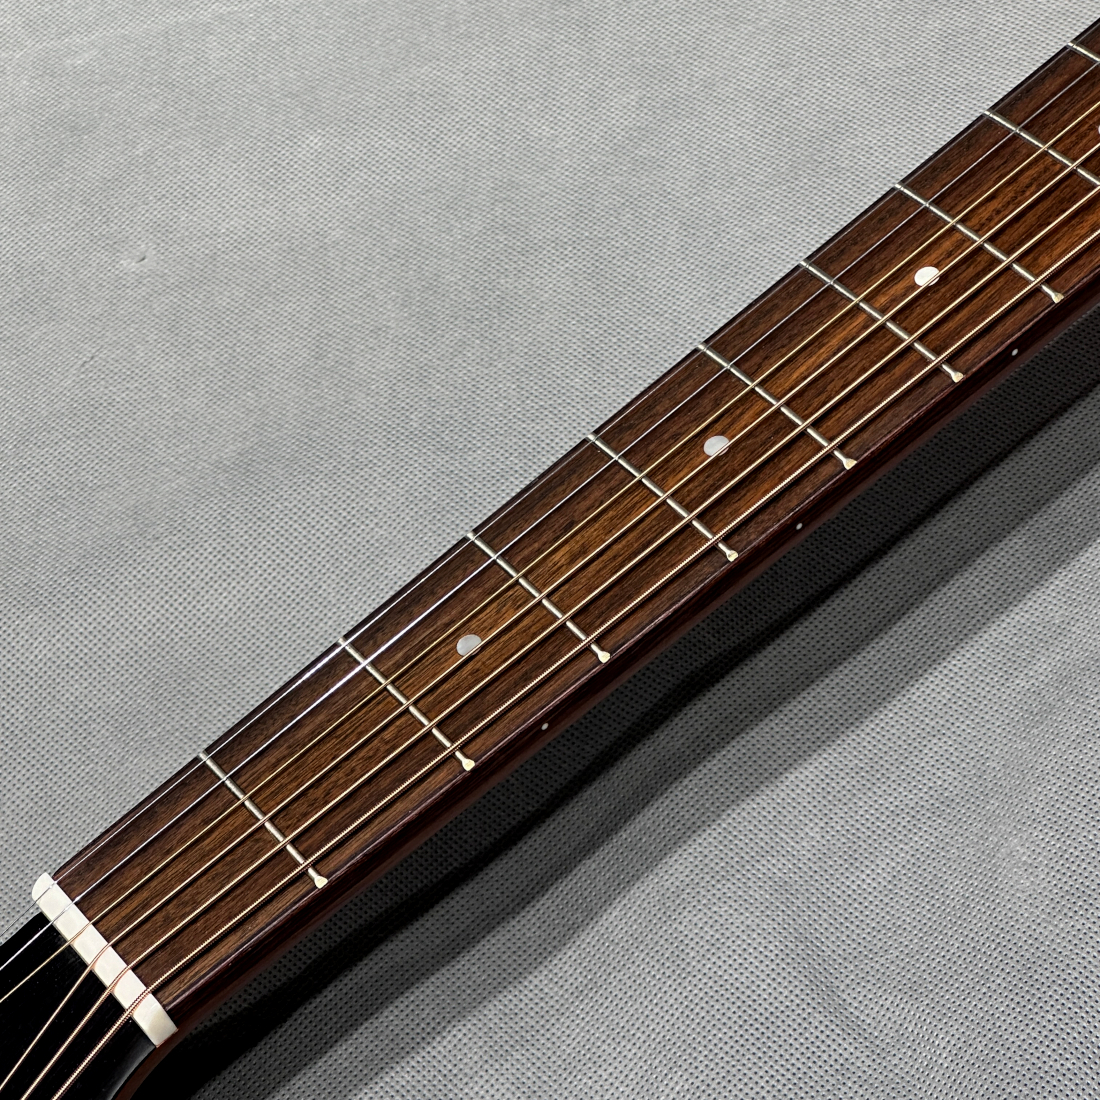 GUILD Guild D-240E Flamed Mahogany ギルド PU搭載 エレアコ ギグバッグ付属 アウトレット特価 - ギター